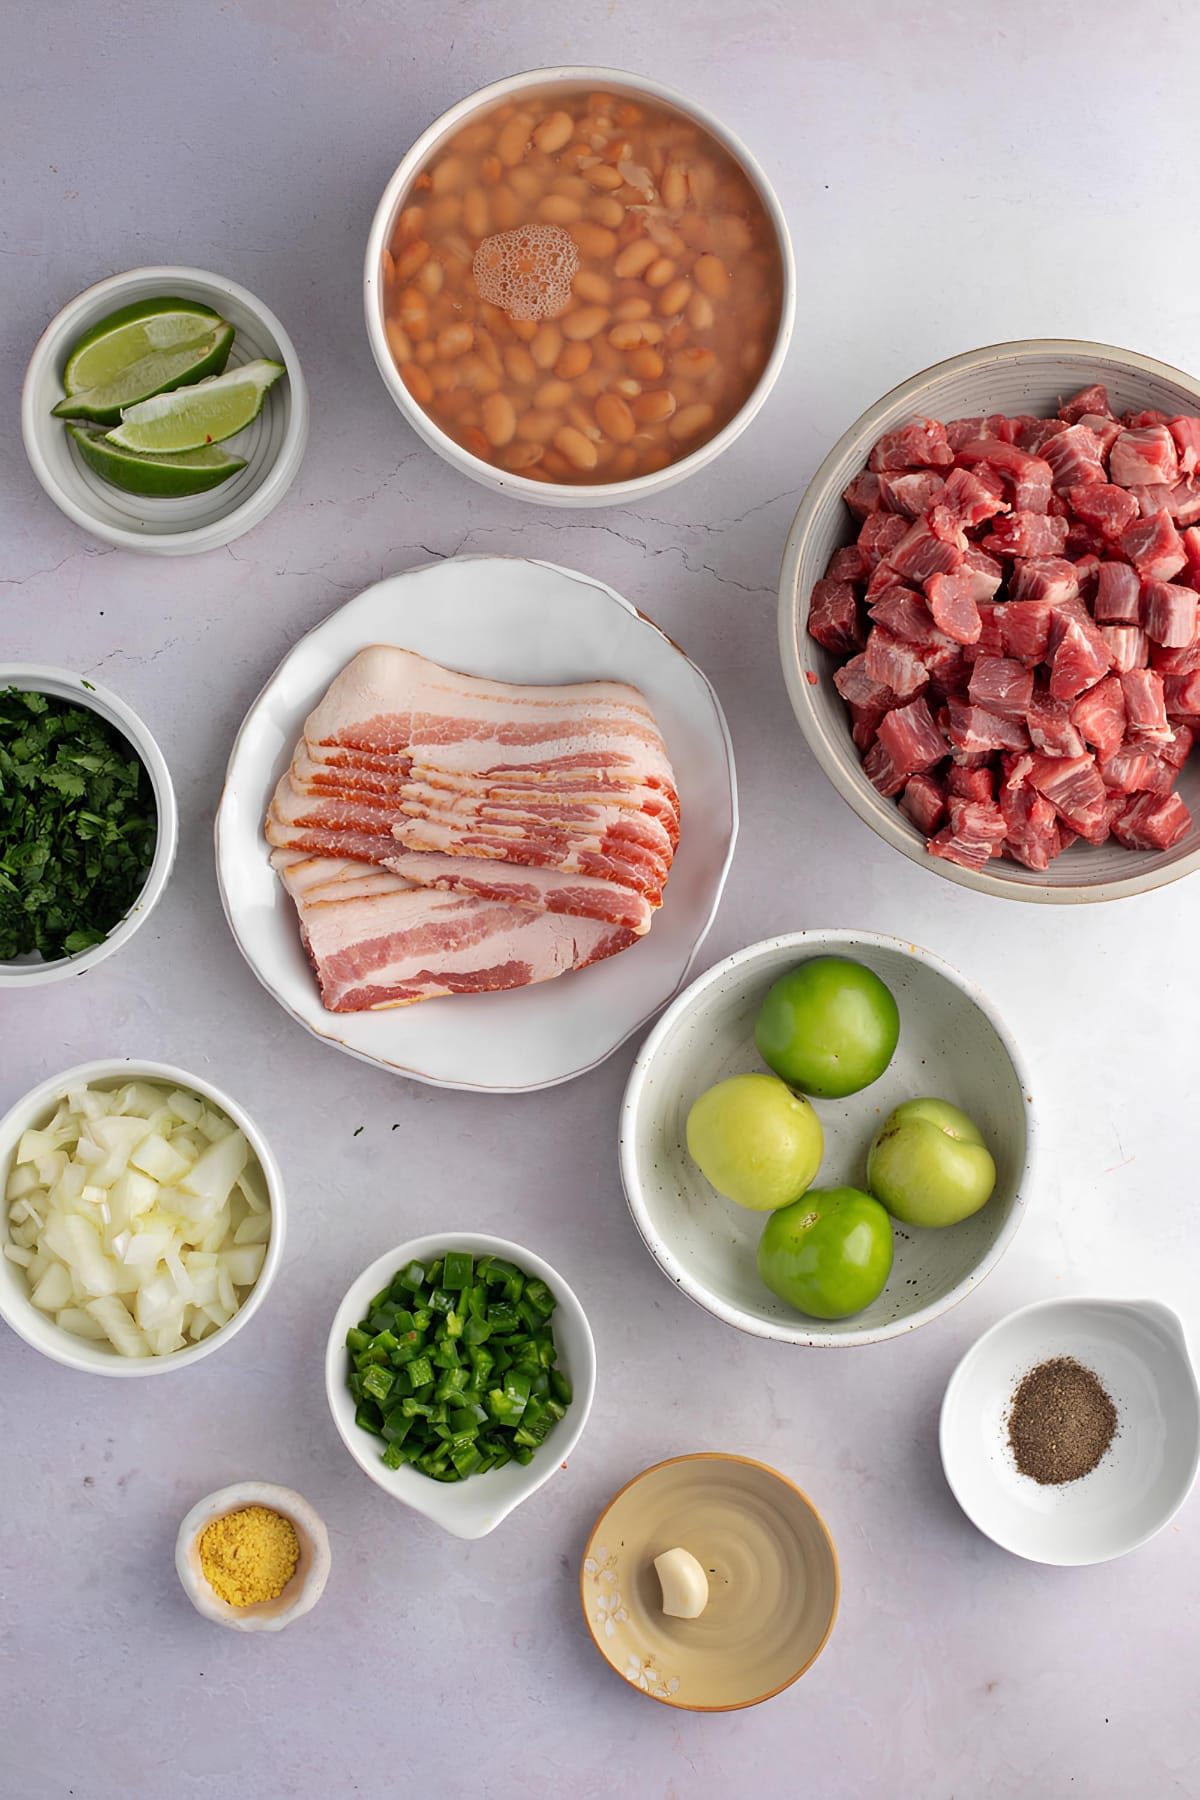 Ingredients for Carne En Su Jugo: Bacon, Tomatillos, Peppers, Garlic, Flank Steak, Chicken Bouillon, Beans and Garnishes